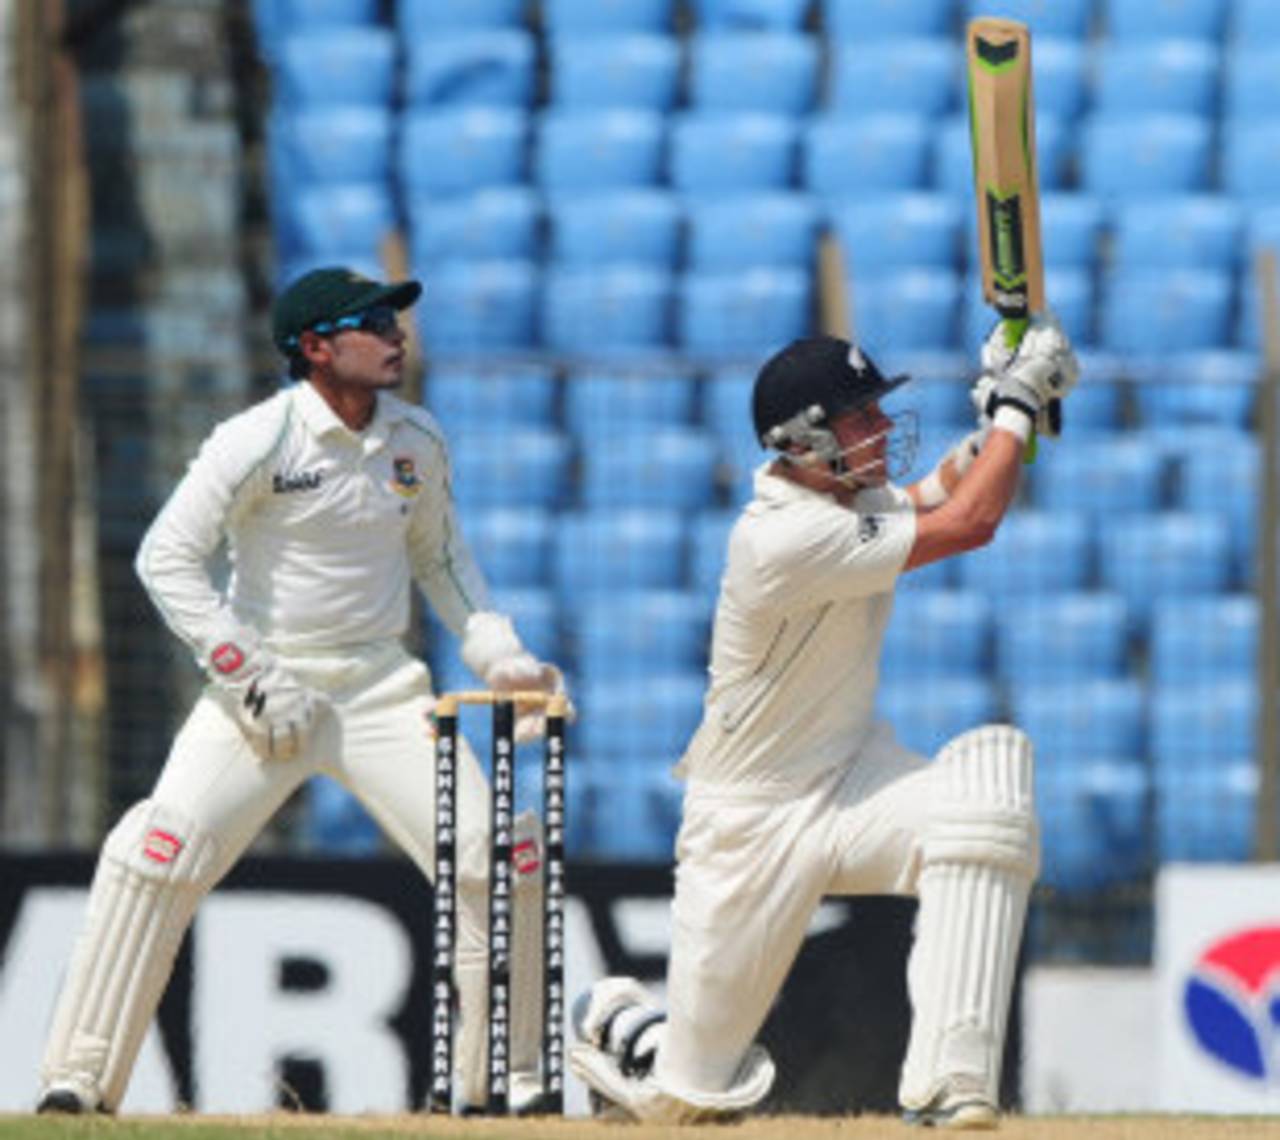 Trent Boult plays a sweep shot, Bangladesh v New Zealand, 1st Test, Chittagong, 2nd day, October 10, 2013